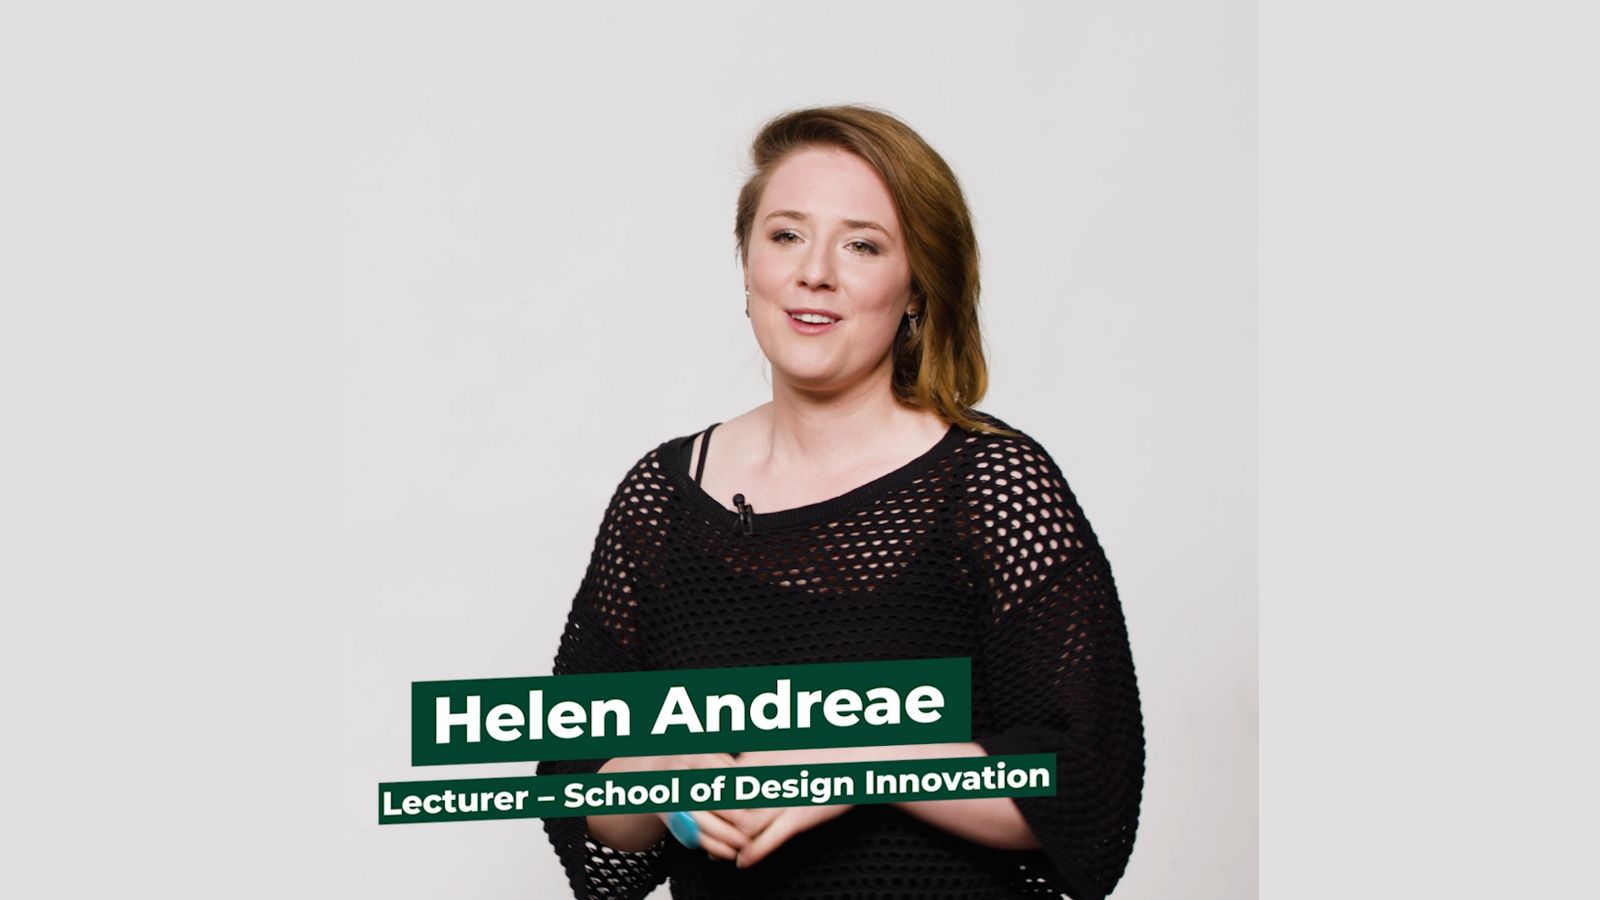 Lecturer Helen Andreae stands facing camera against a white background